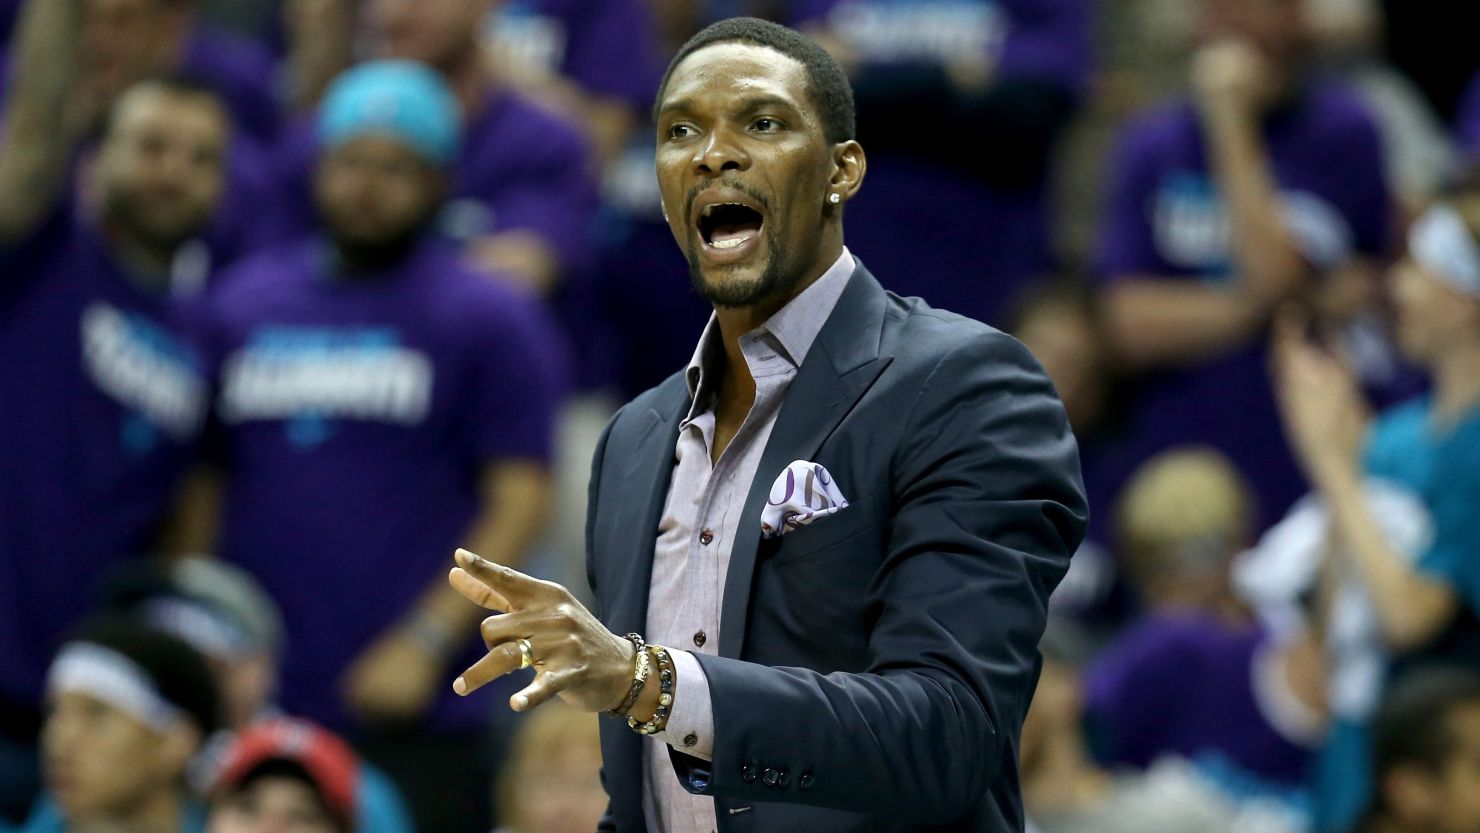 Chris Bosh hasn't played since February 9 but has been cheering his team from the bench.